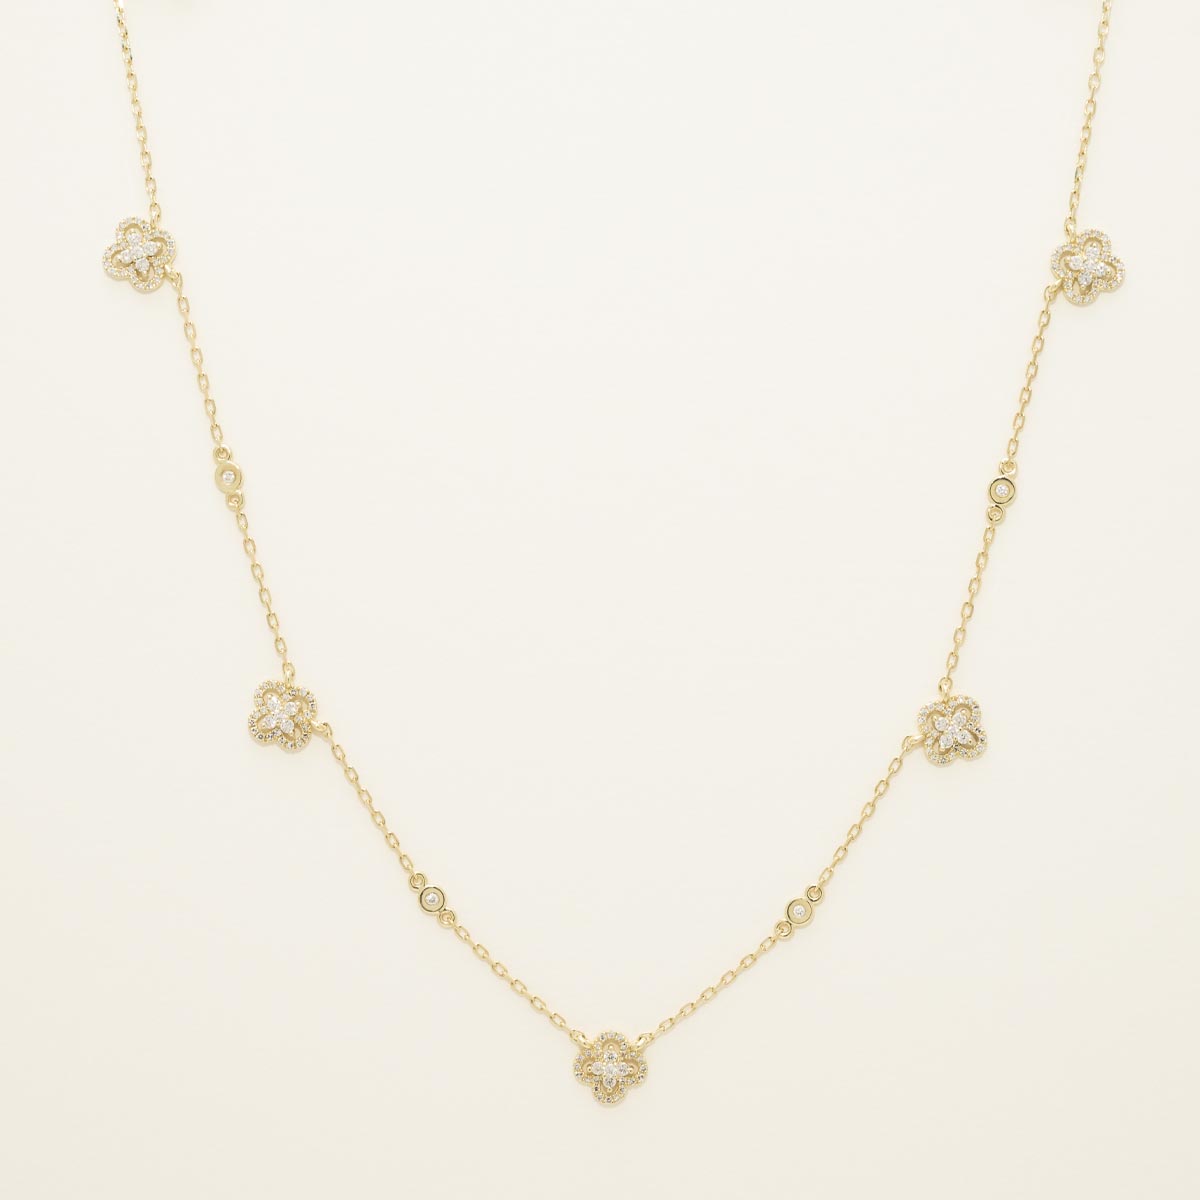 Dabakarov Diamond Flower Station Necklace in 14kt Yellow Gold (3/4ct tw)